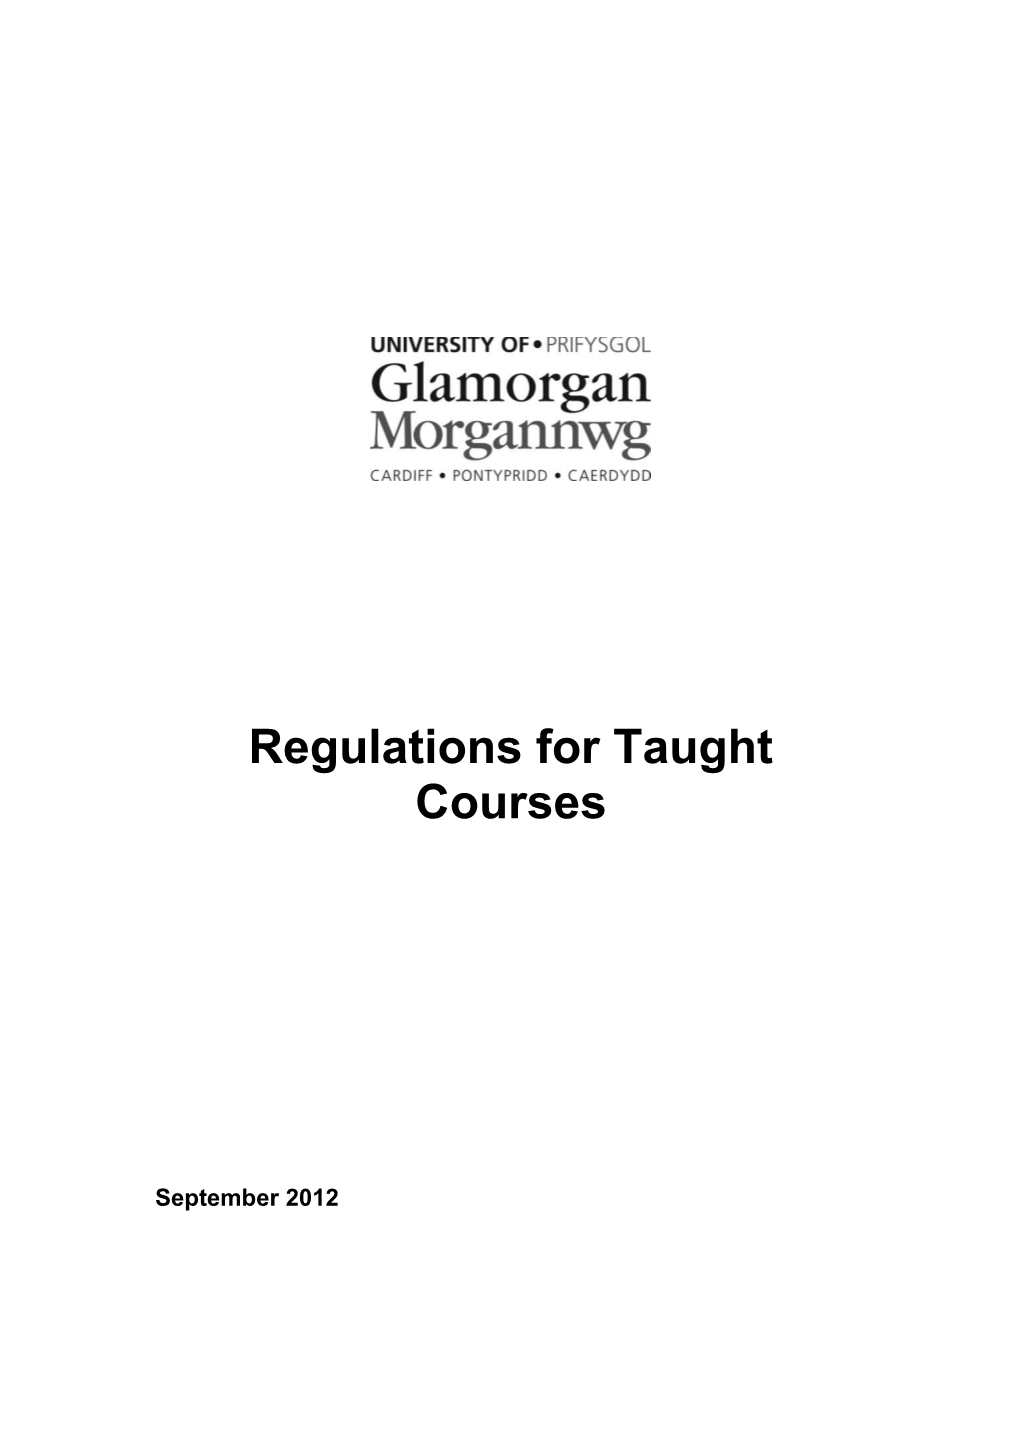 Regulations for Taught Courses